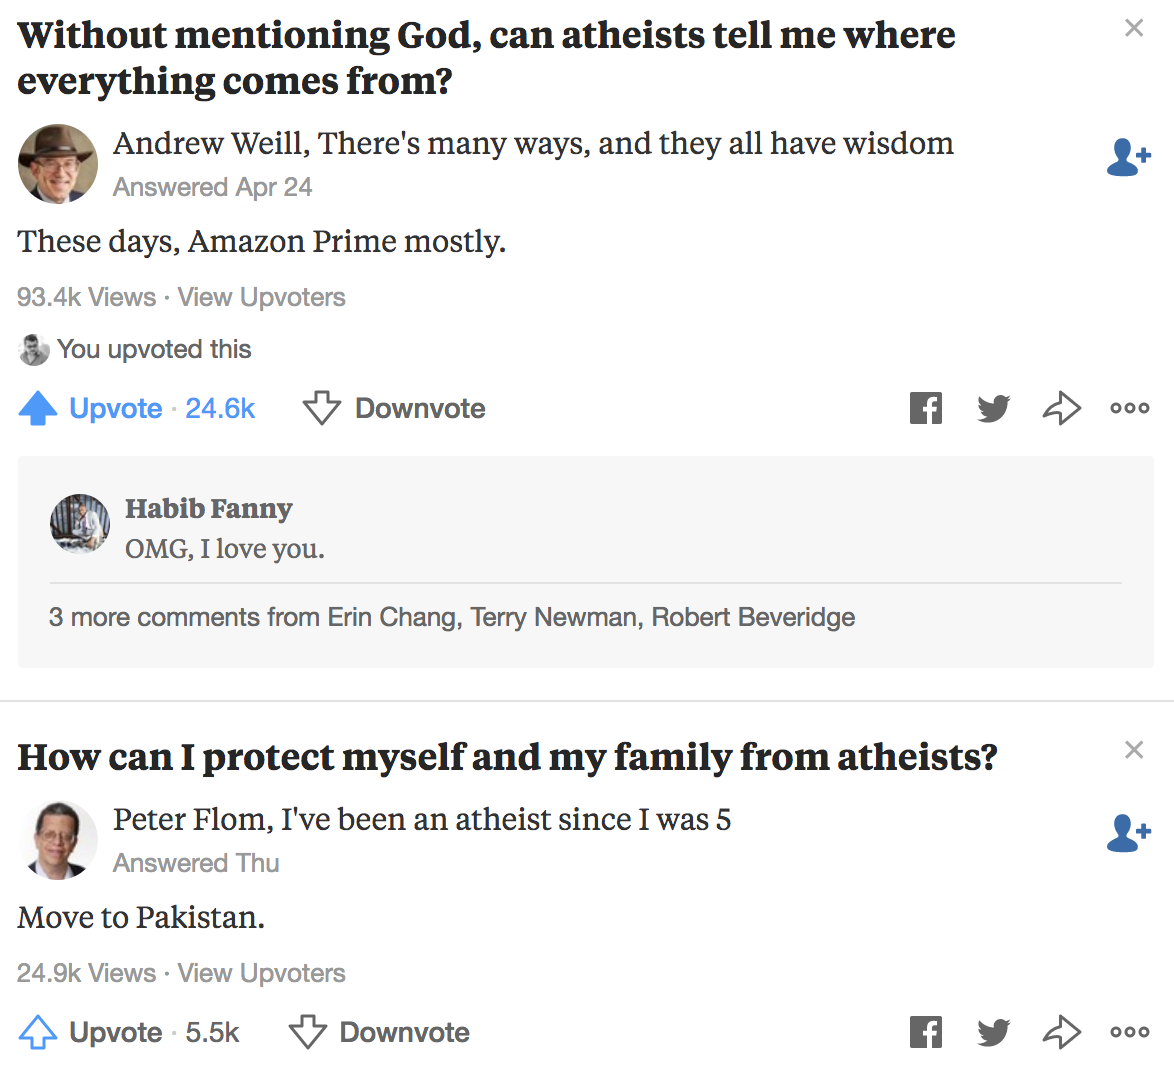 The "Atheist" answers on Quora are a gift that keeps on giving.